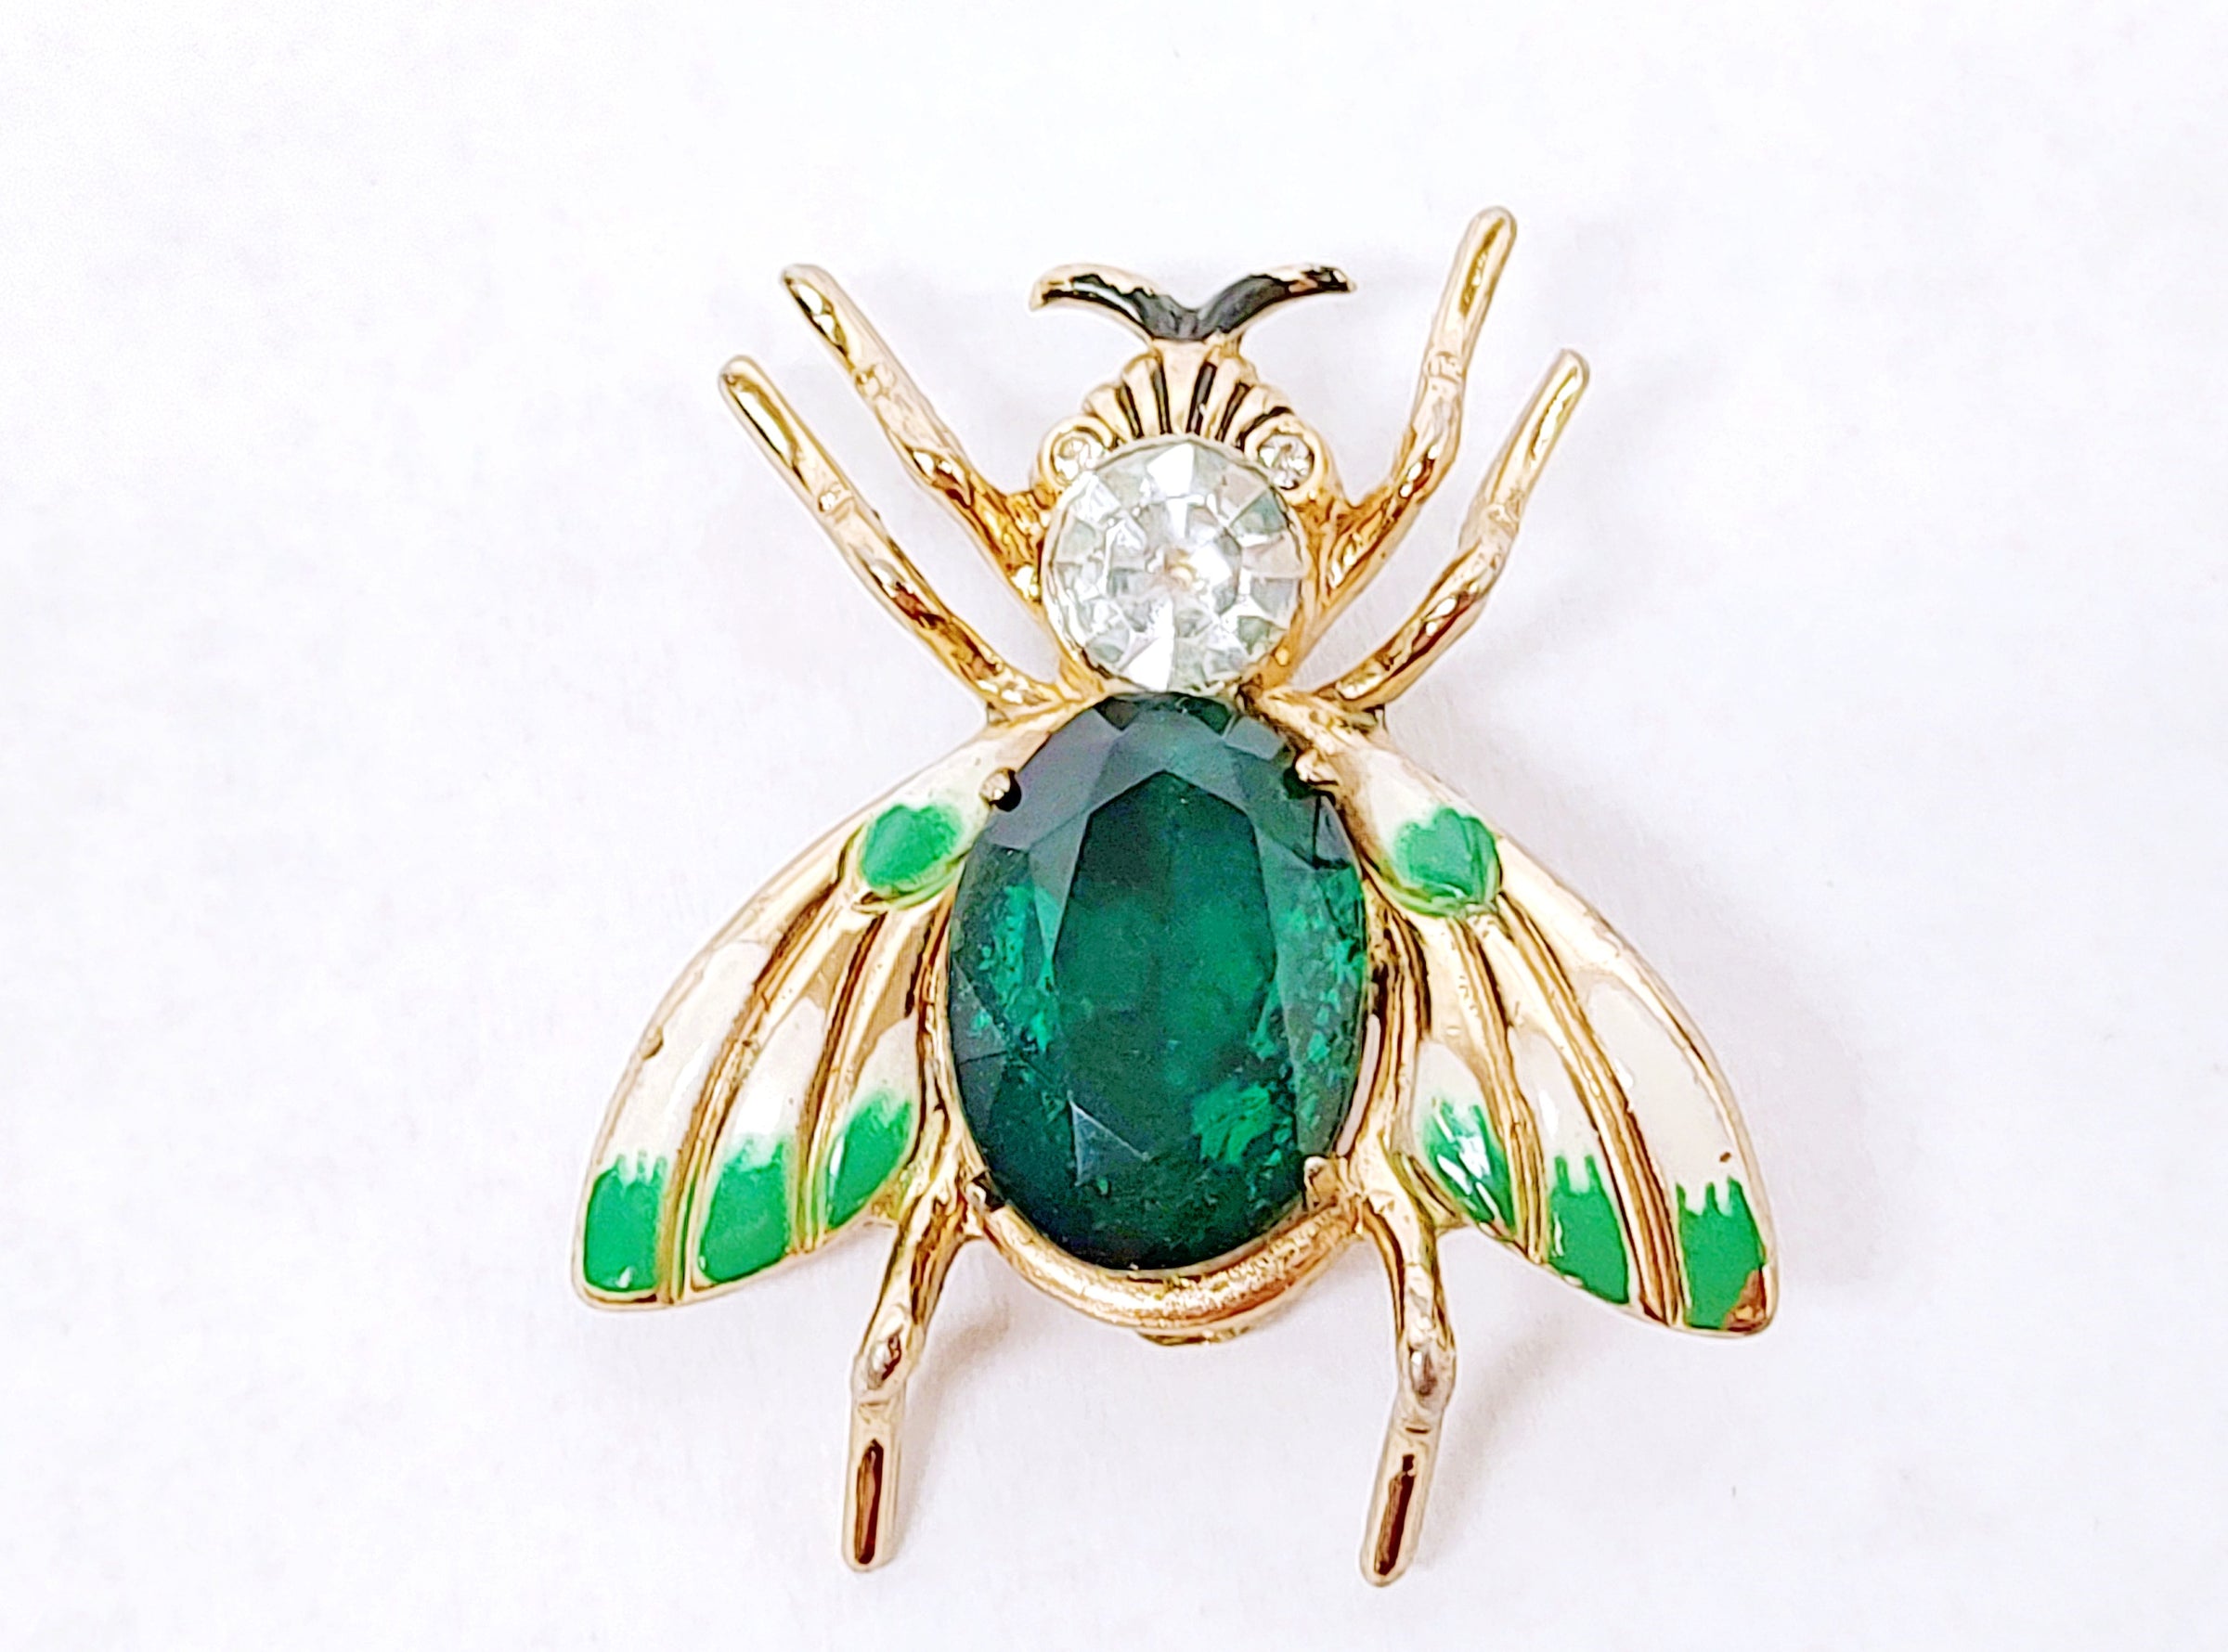 Vintage Large Rhinestone Spider Brooch Pin with Green Eyes